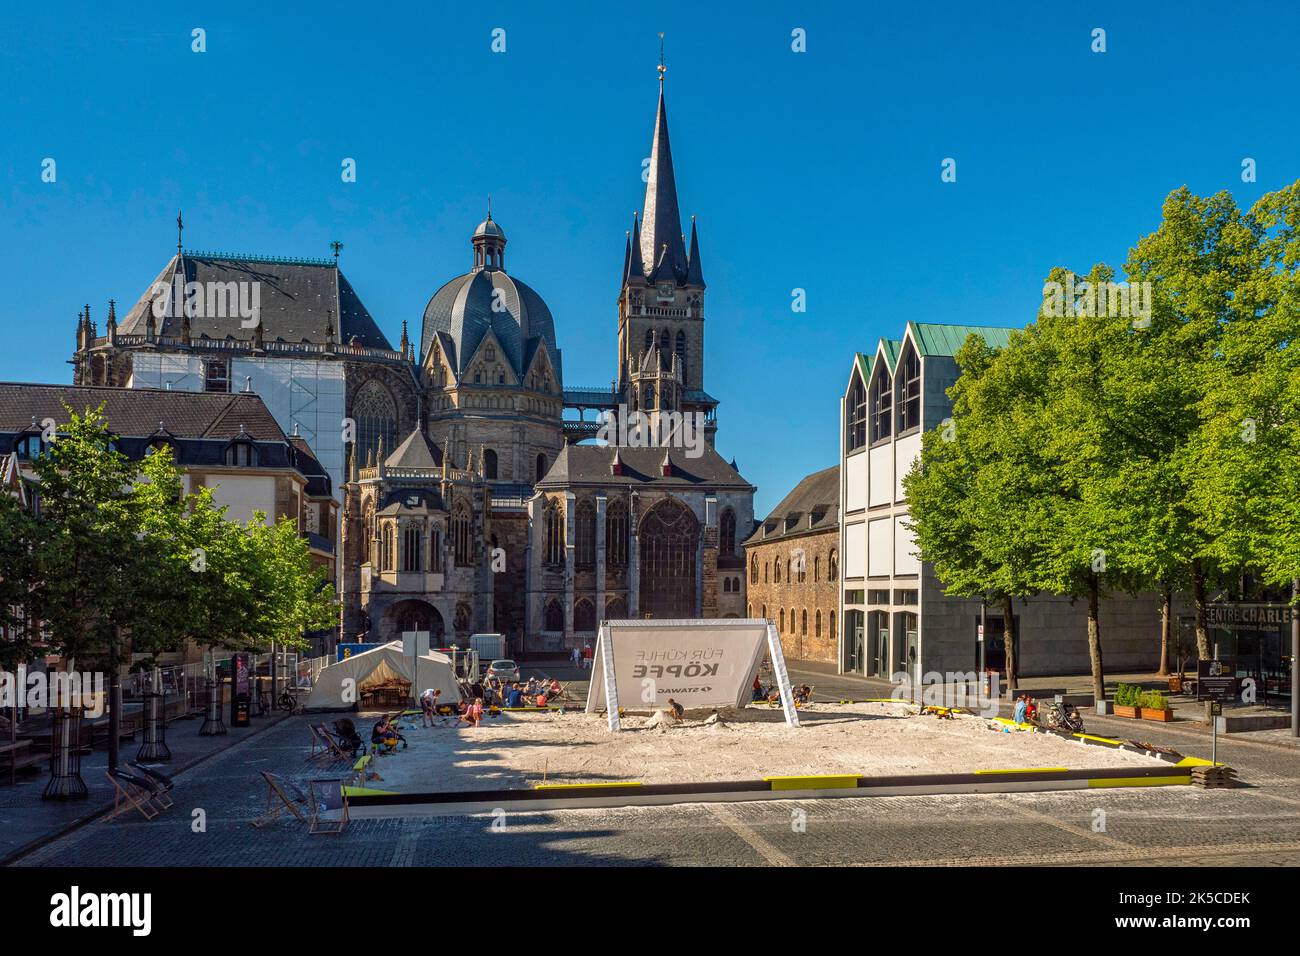 Katschhof, Archimedean Sandpit and Aachen Cathedral, Aachen, North Rhine-Westphalia, Germany Stock Photo